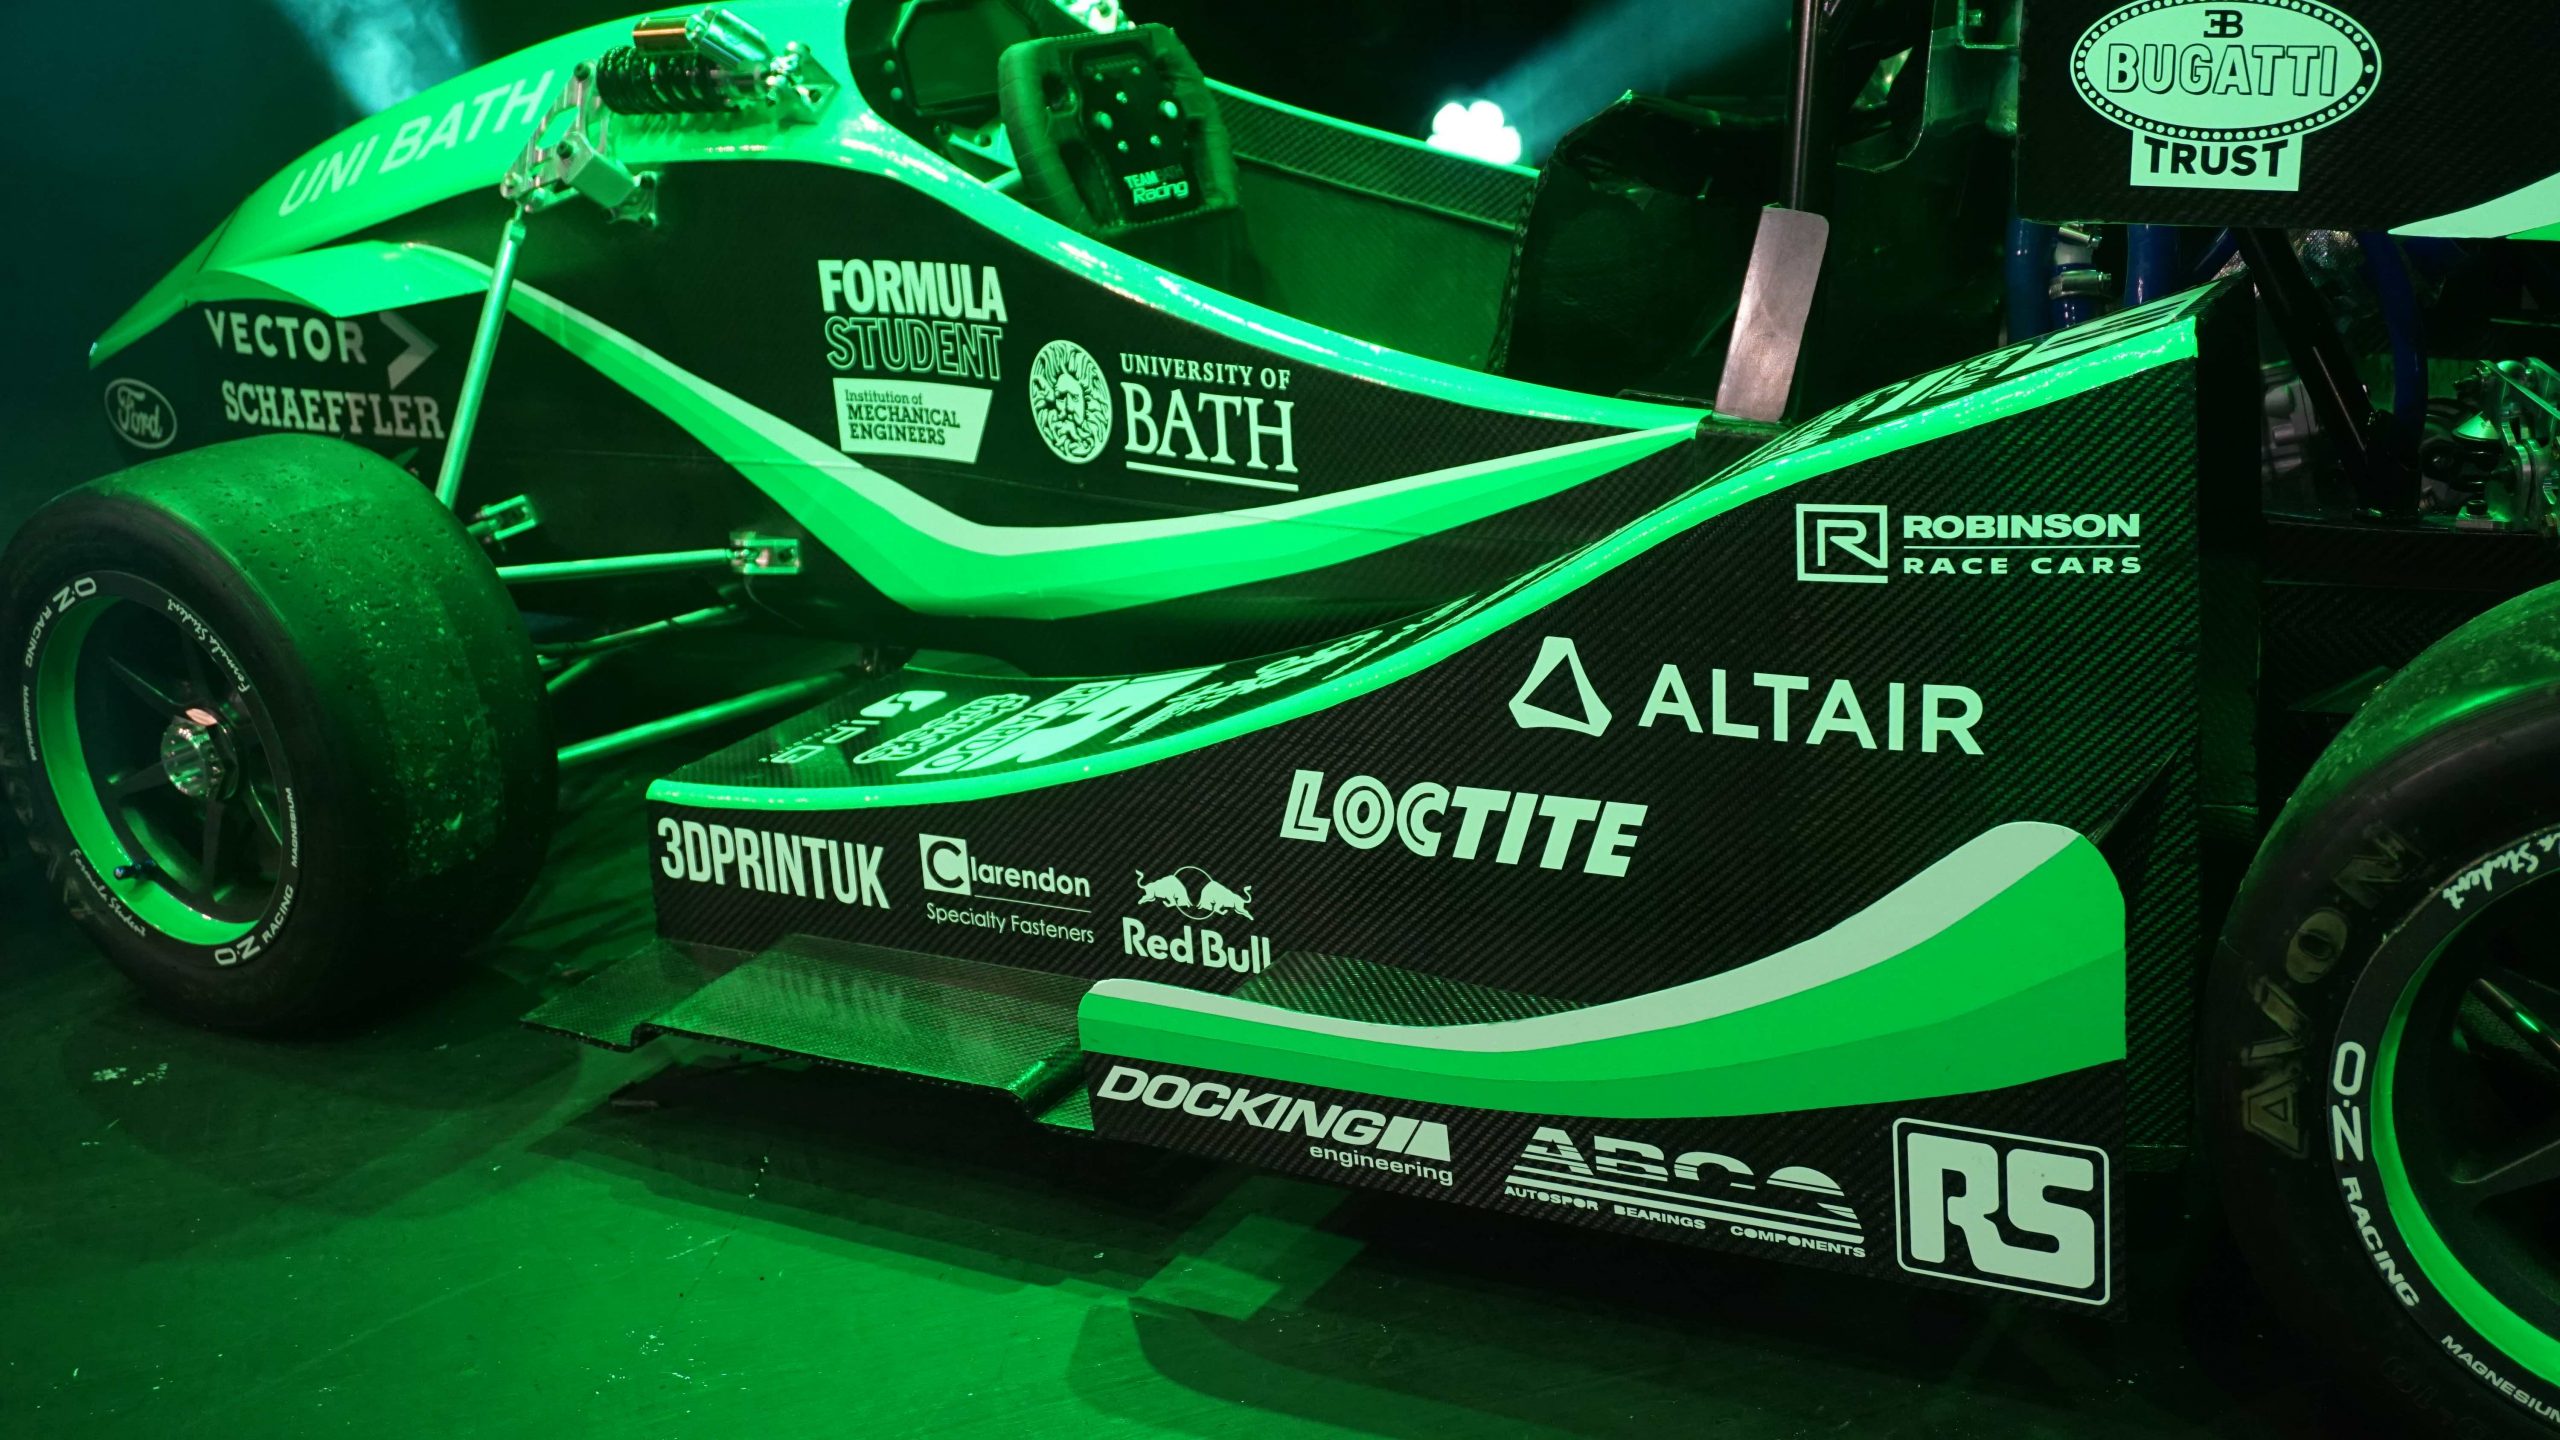 The TBR21 racing car from Team Bath Racing which features 3D printed parts. Photo via 3DPRINTUK.